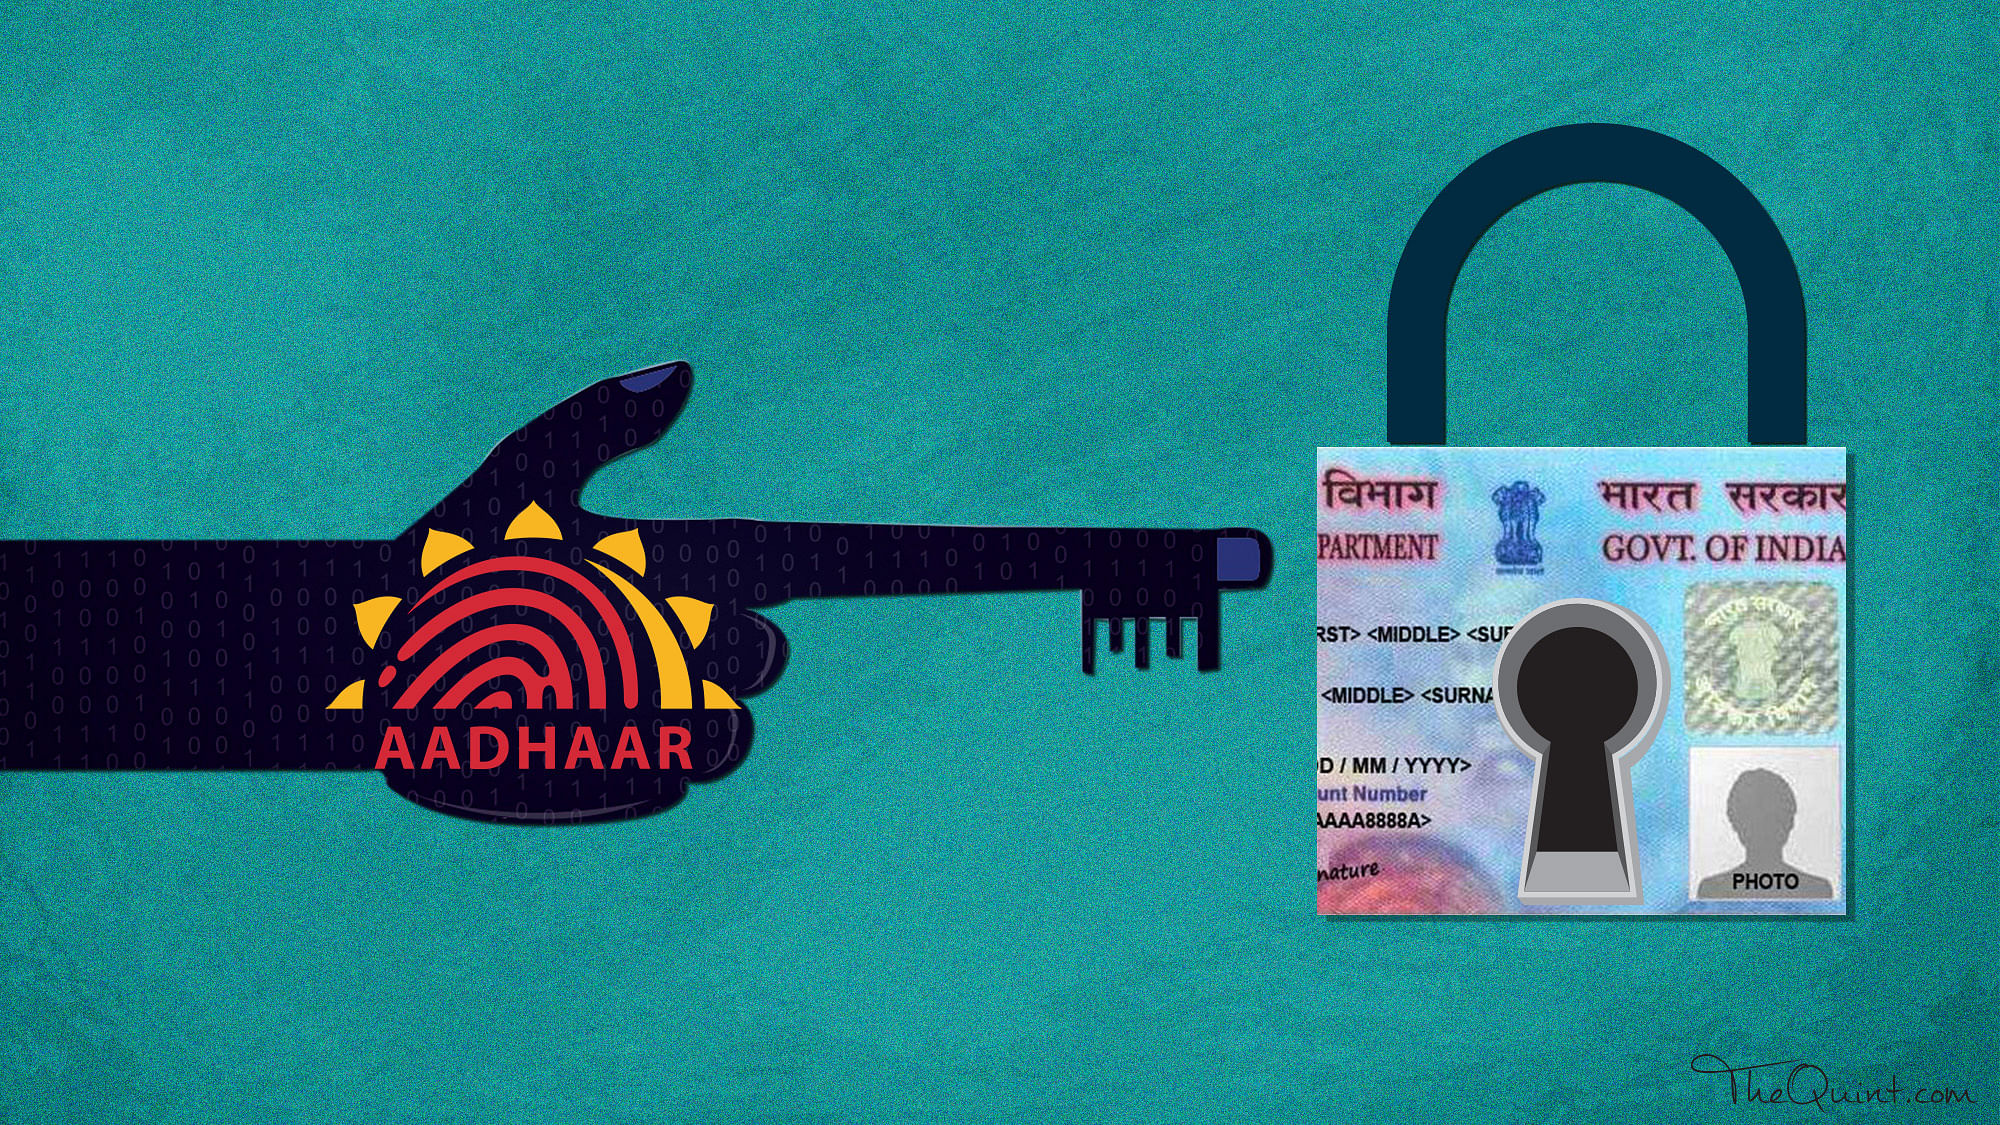 That the UIDAI was badly architected as a single point of failure is something many have said for years. 